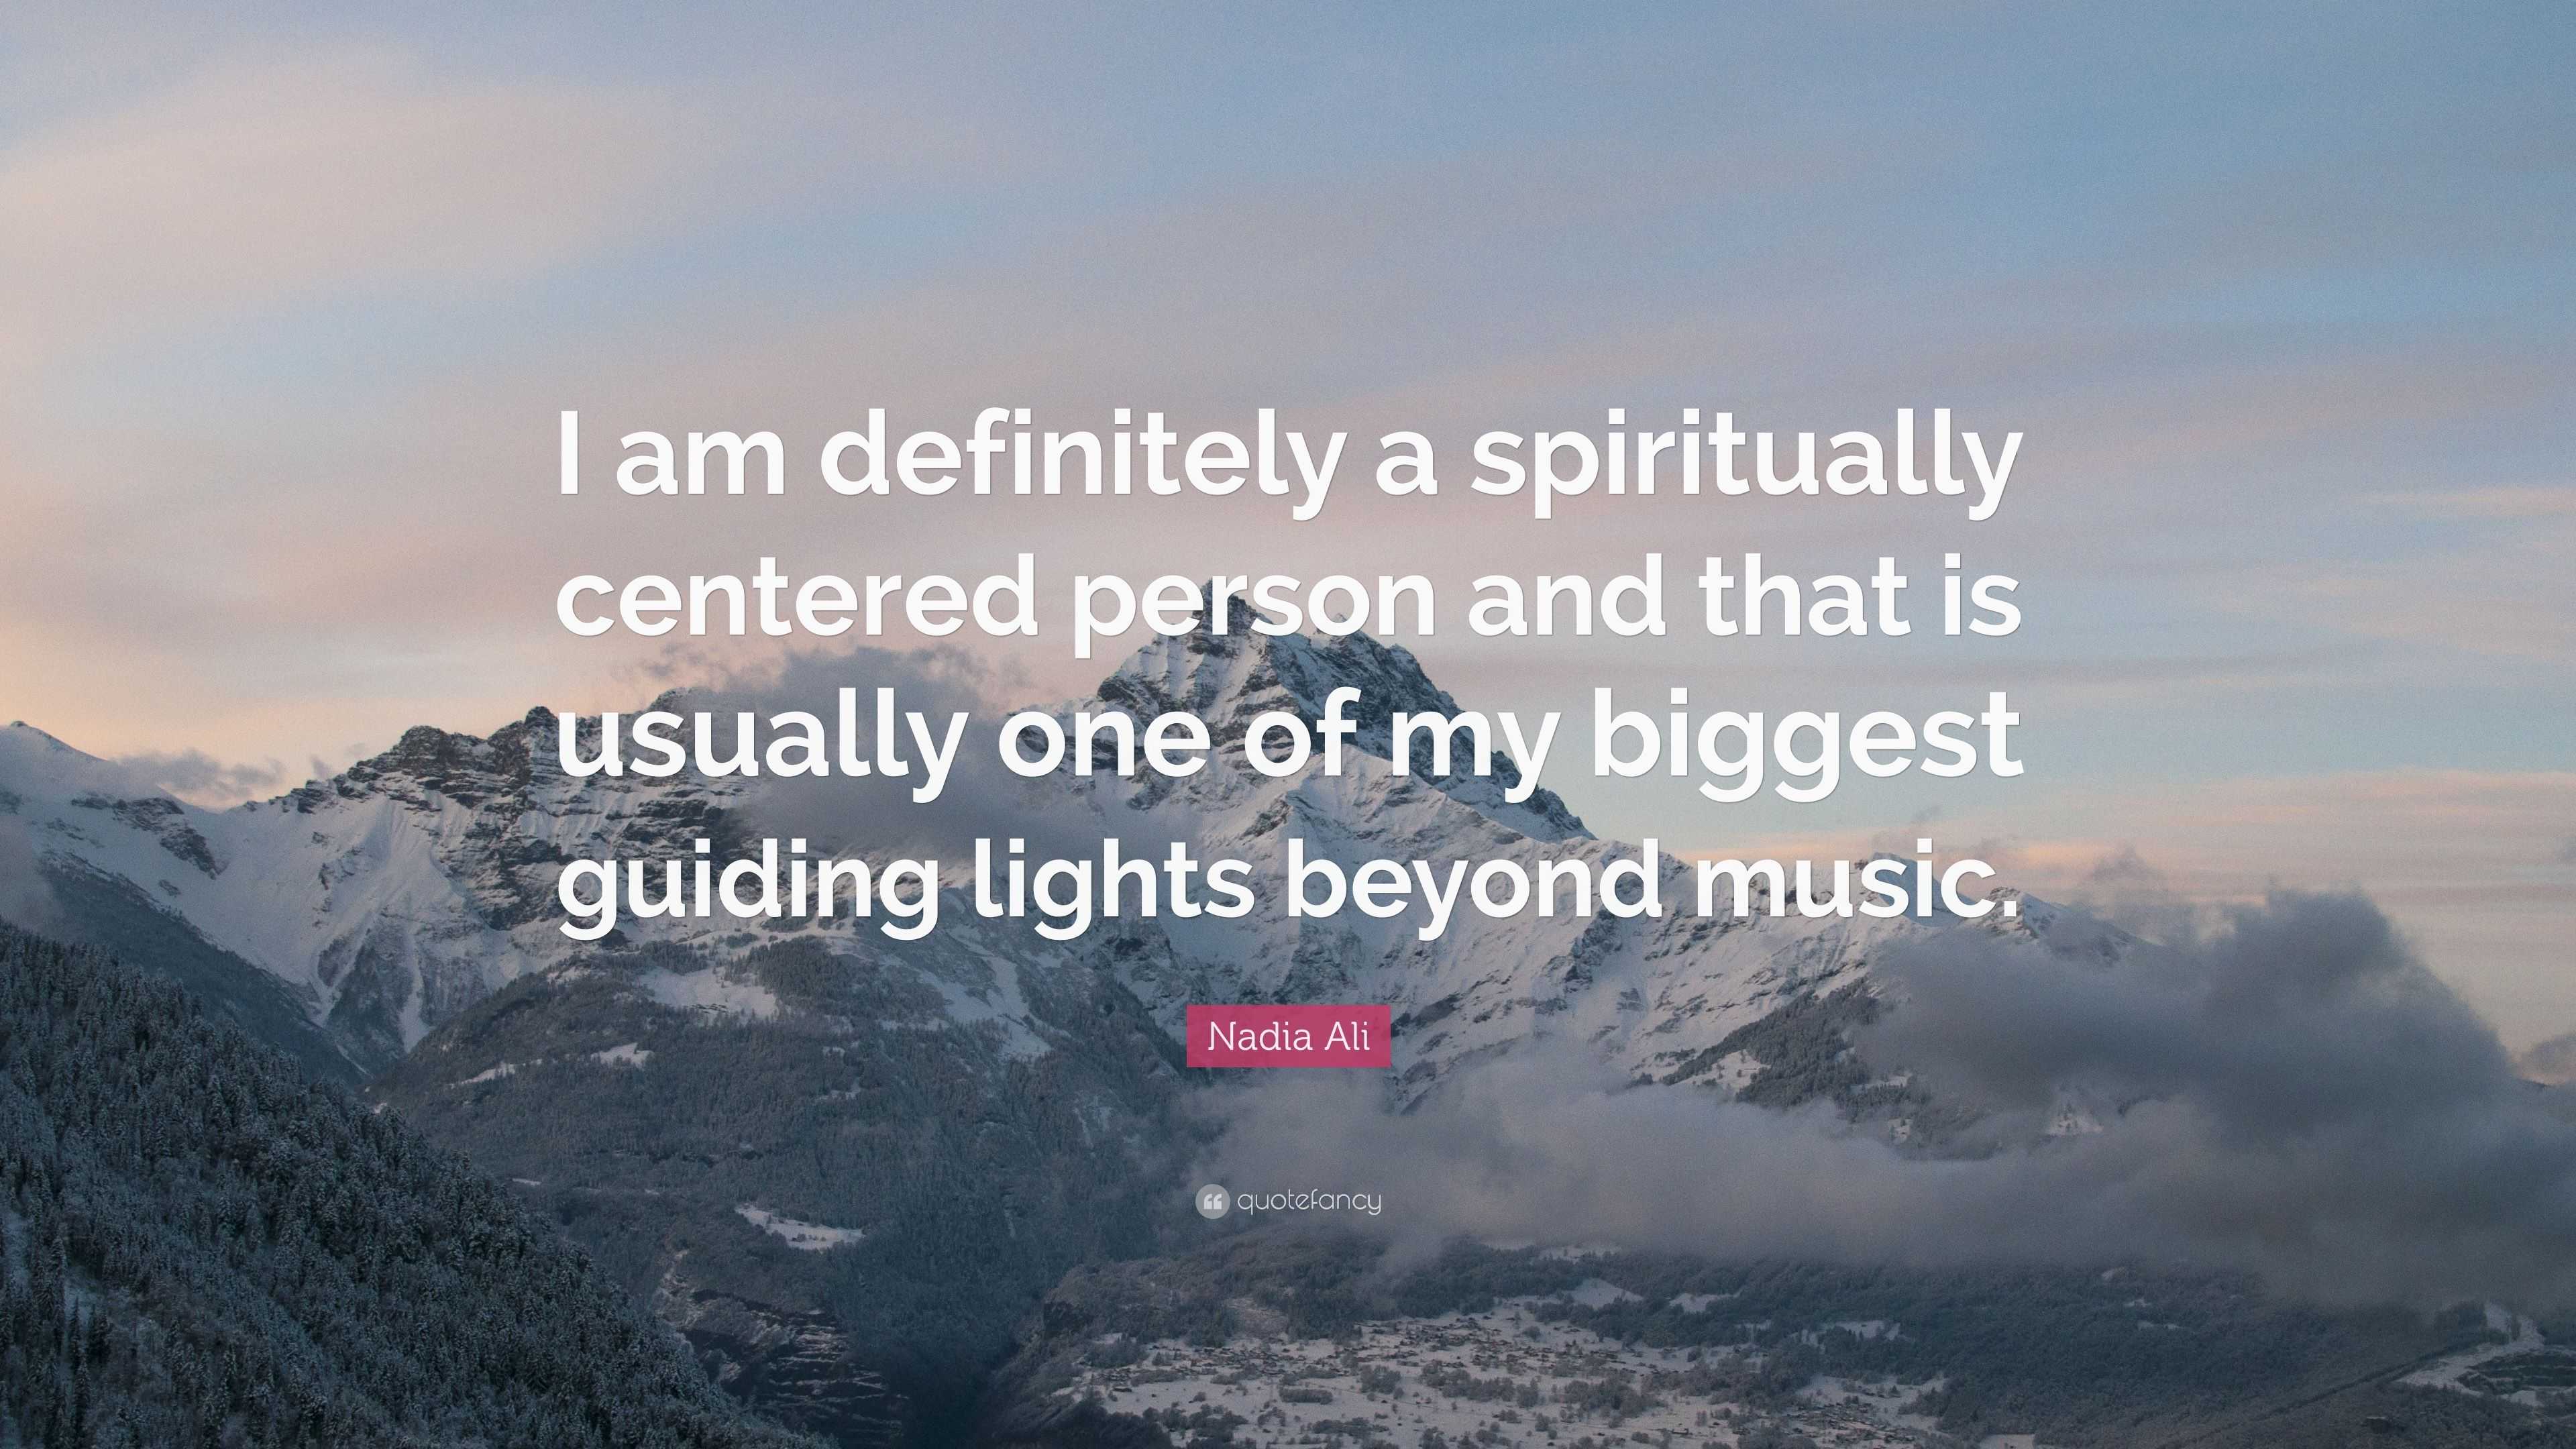 Nadia Ali Quote: “I am definitely a spiritually centered person and that is  usually one of